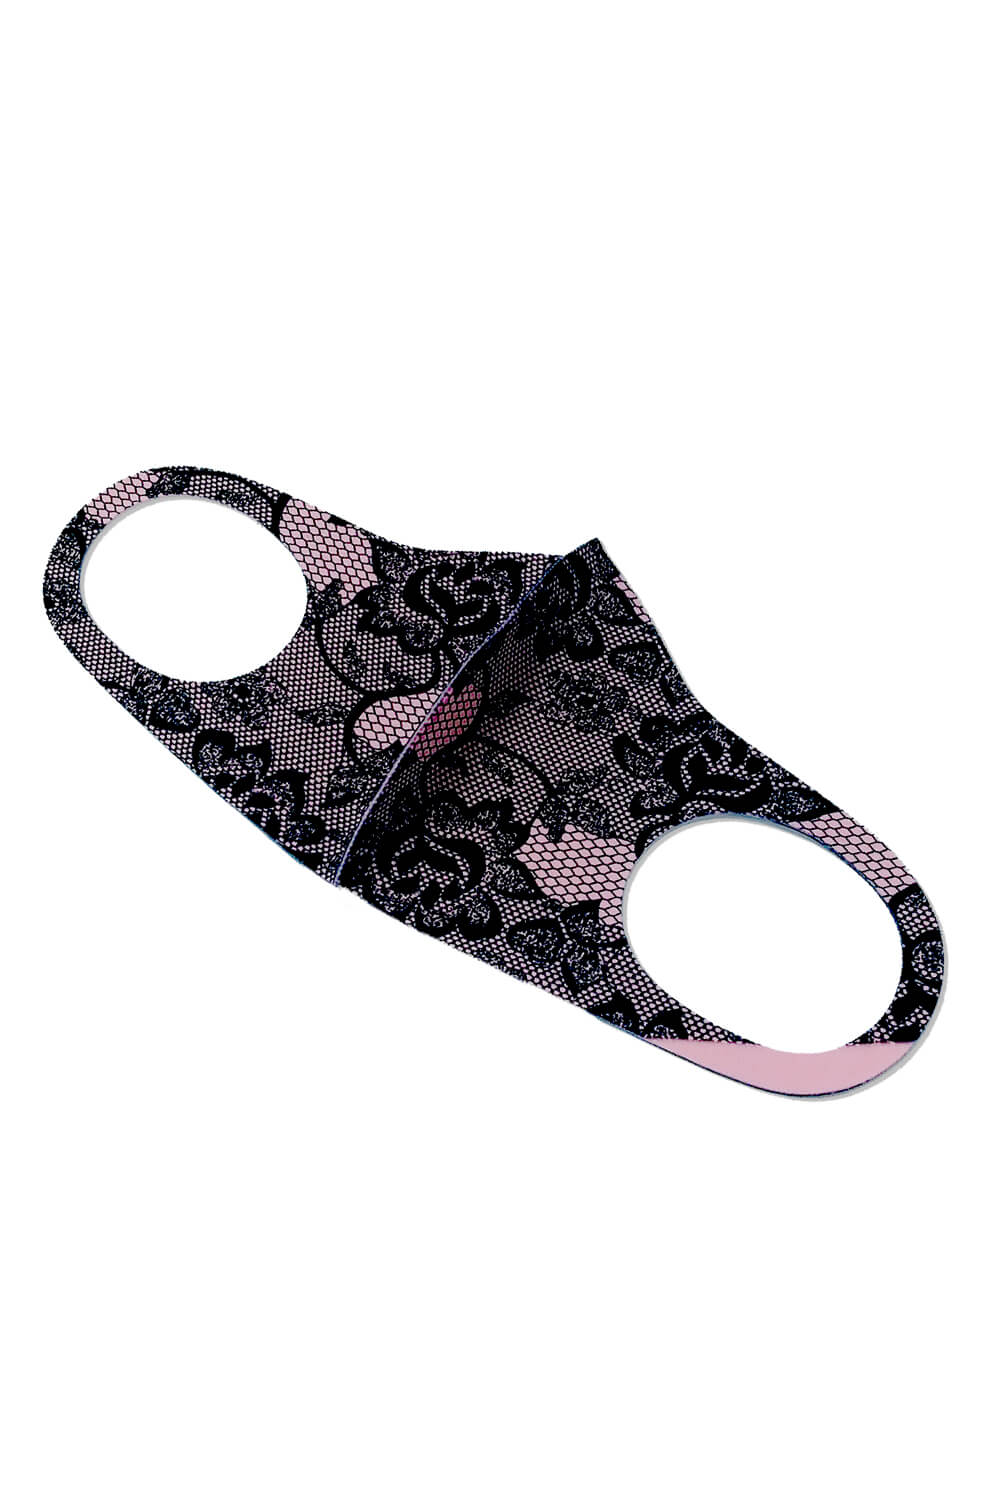 Rose Lace Print Fast Drying Fashion Face Mask, Image 2 of 2